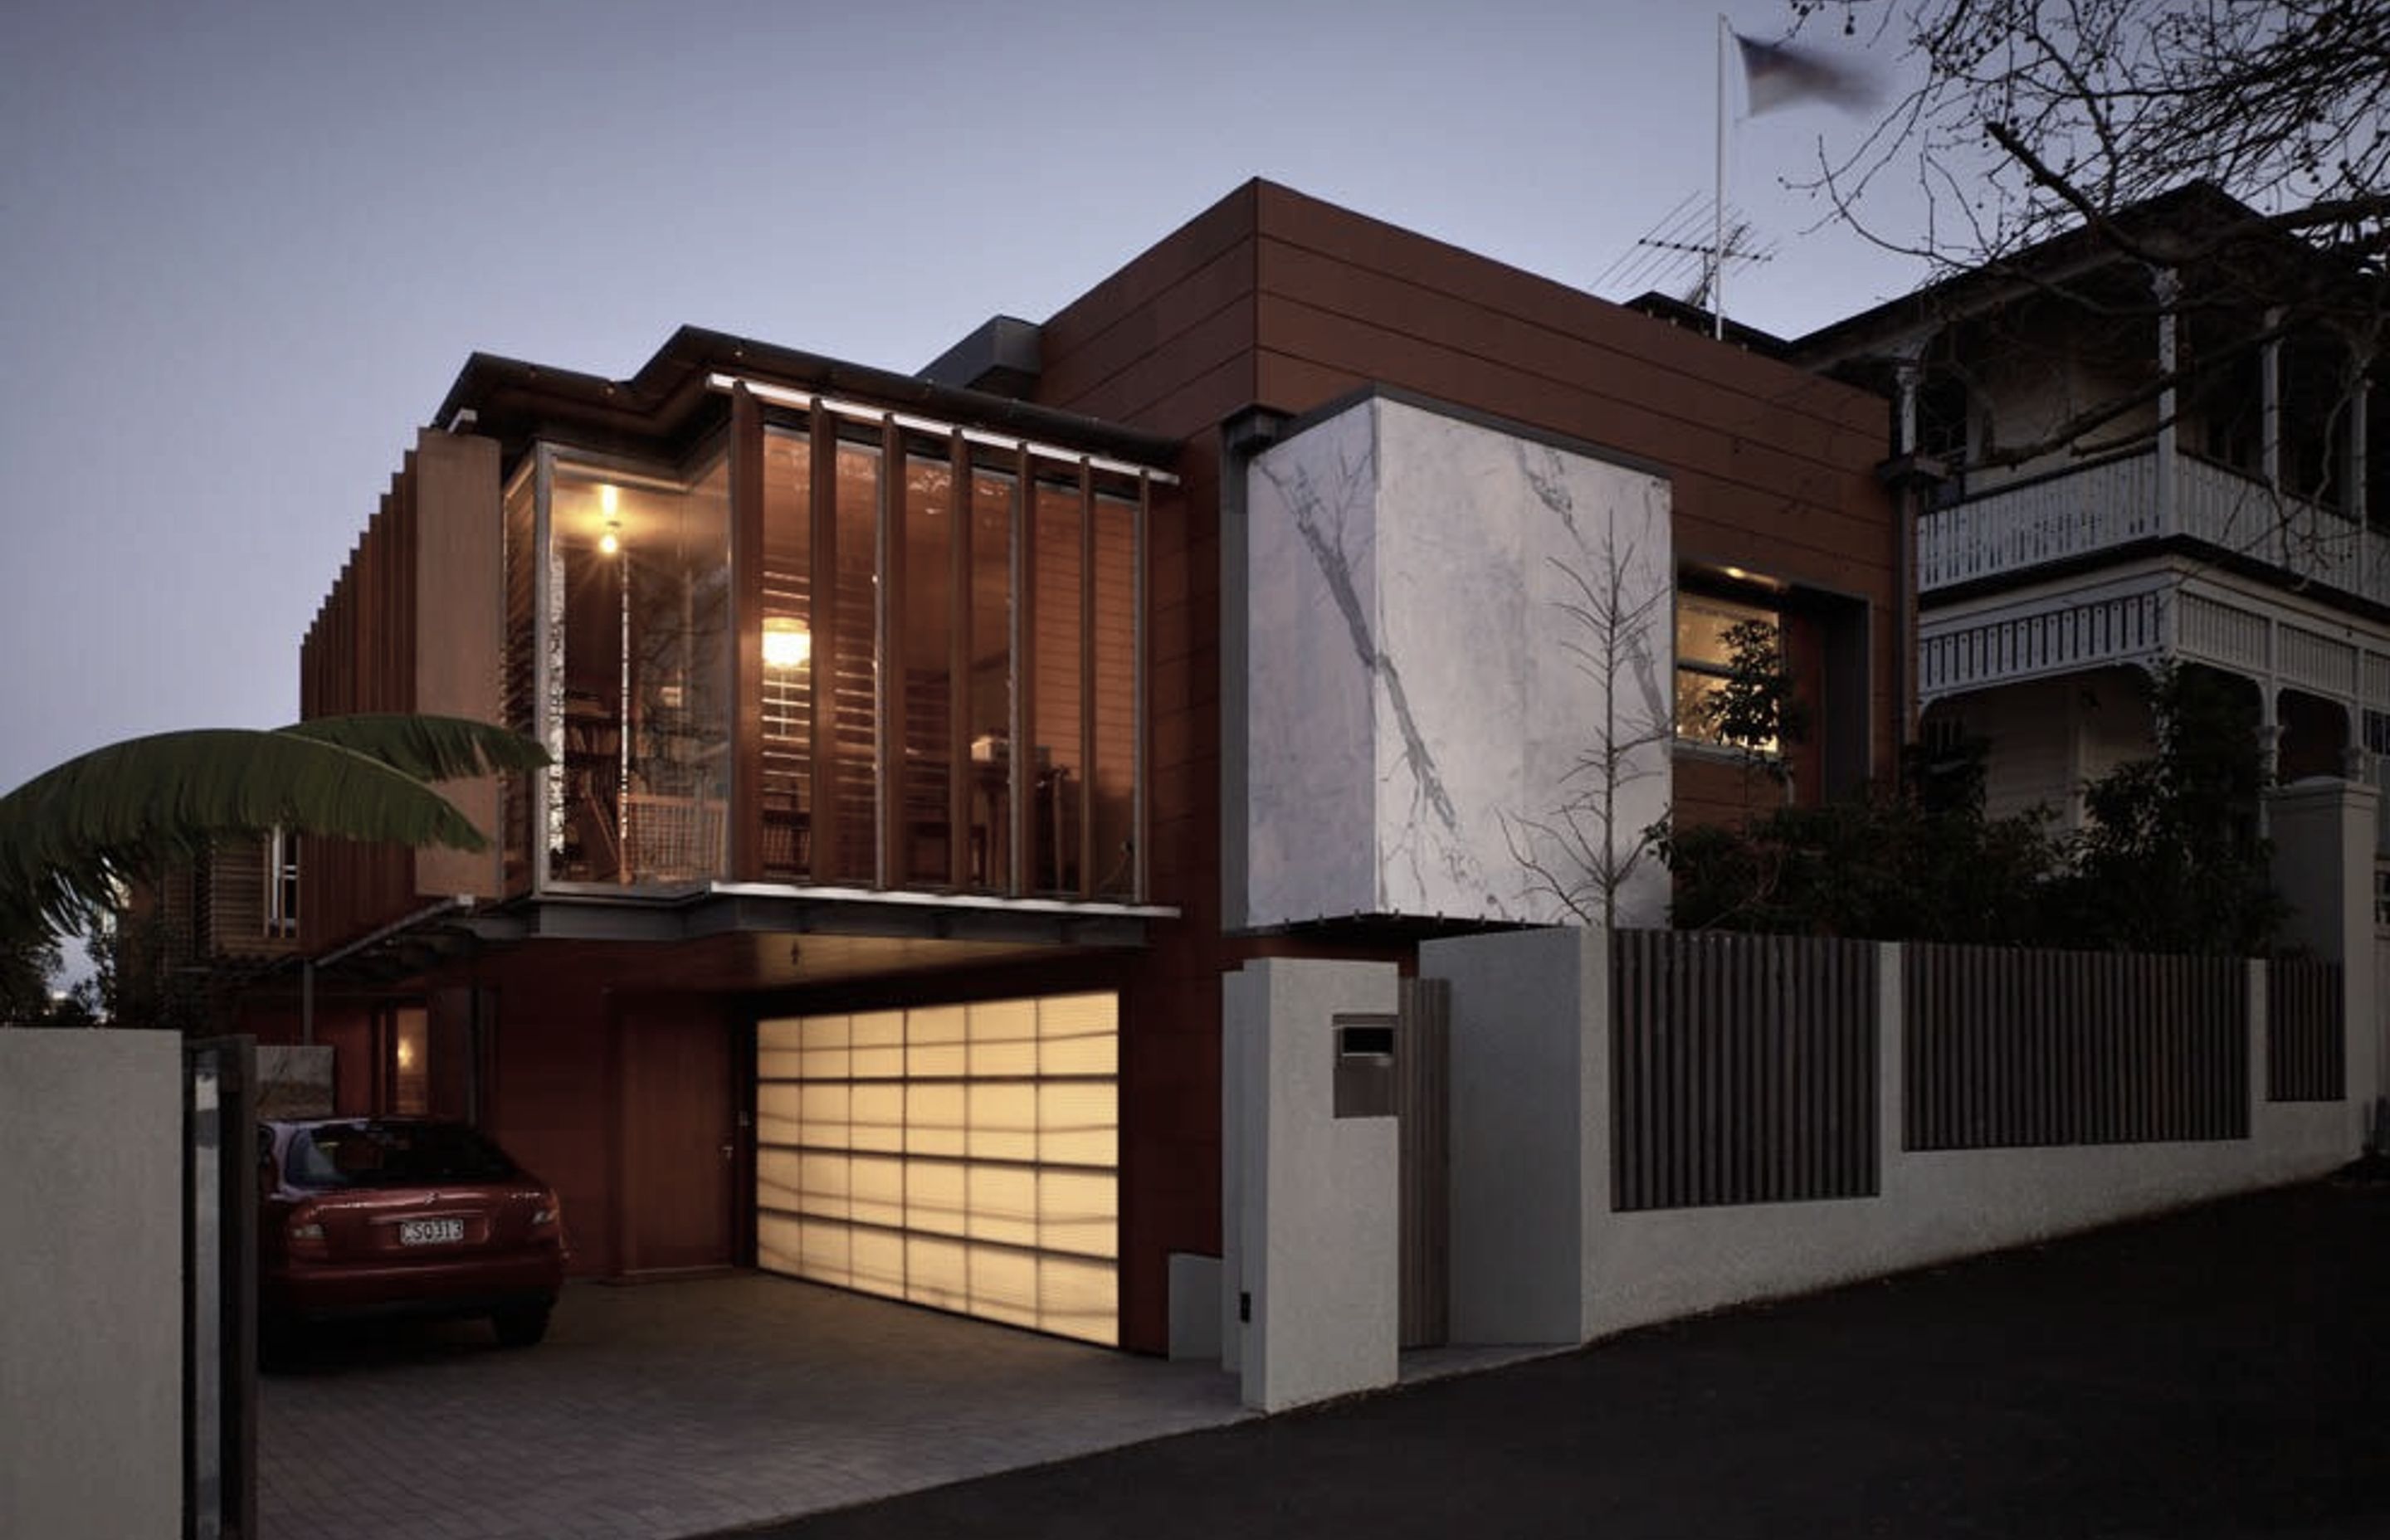 FRANKLIN ROAD TOWNHOUSE, AUCKLAND